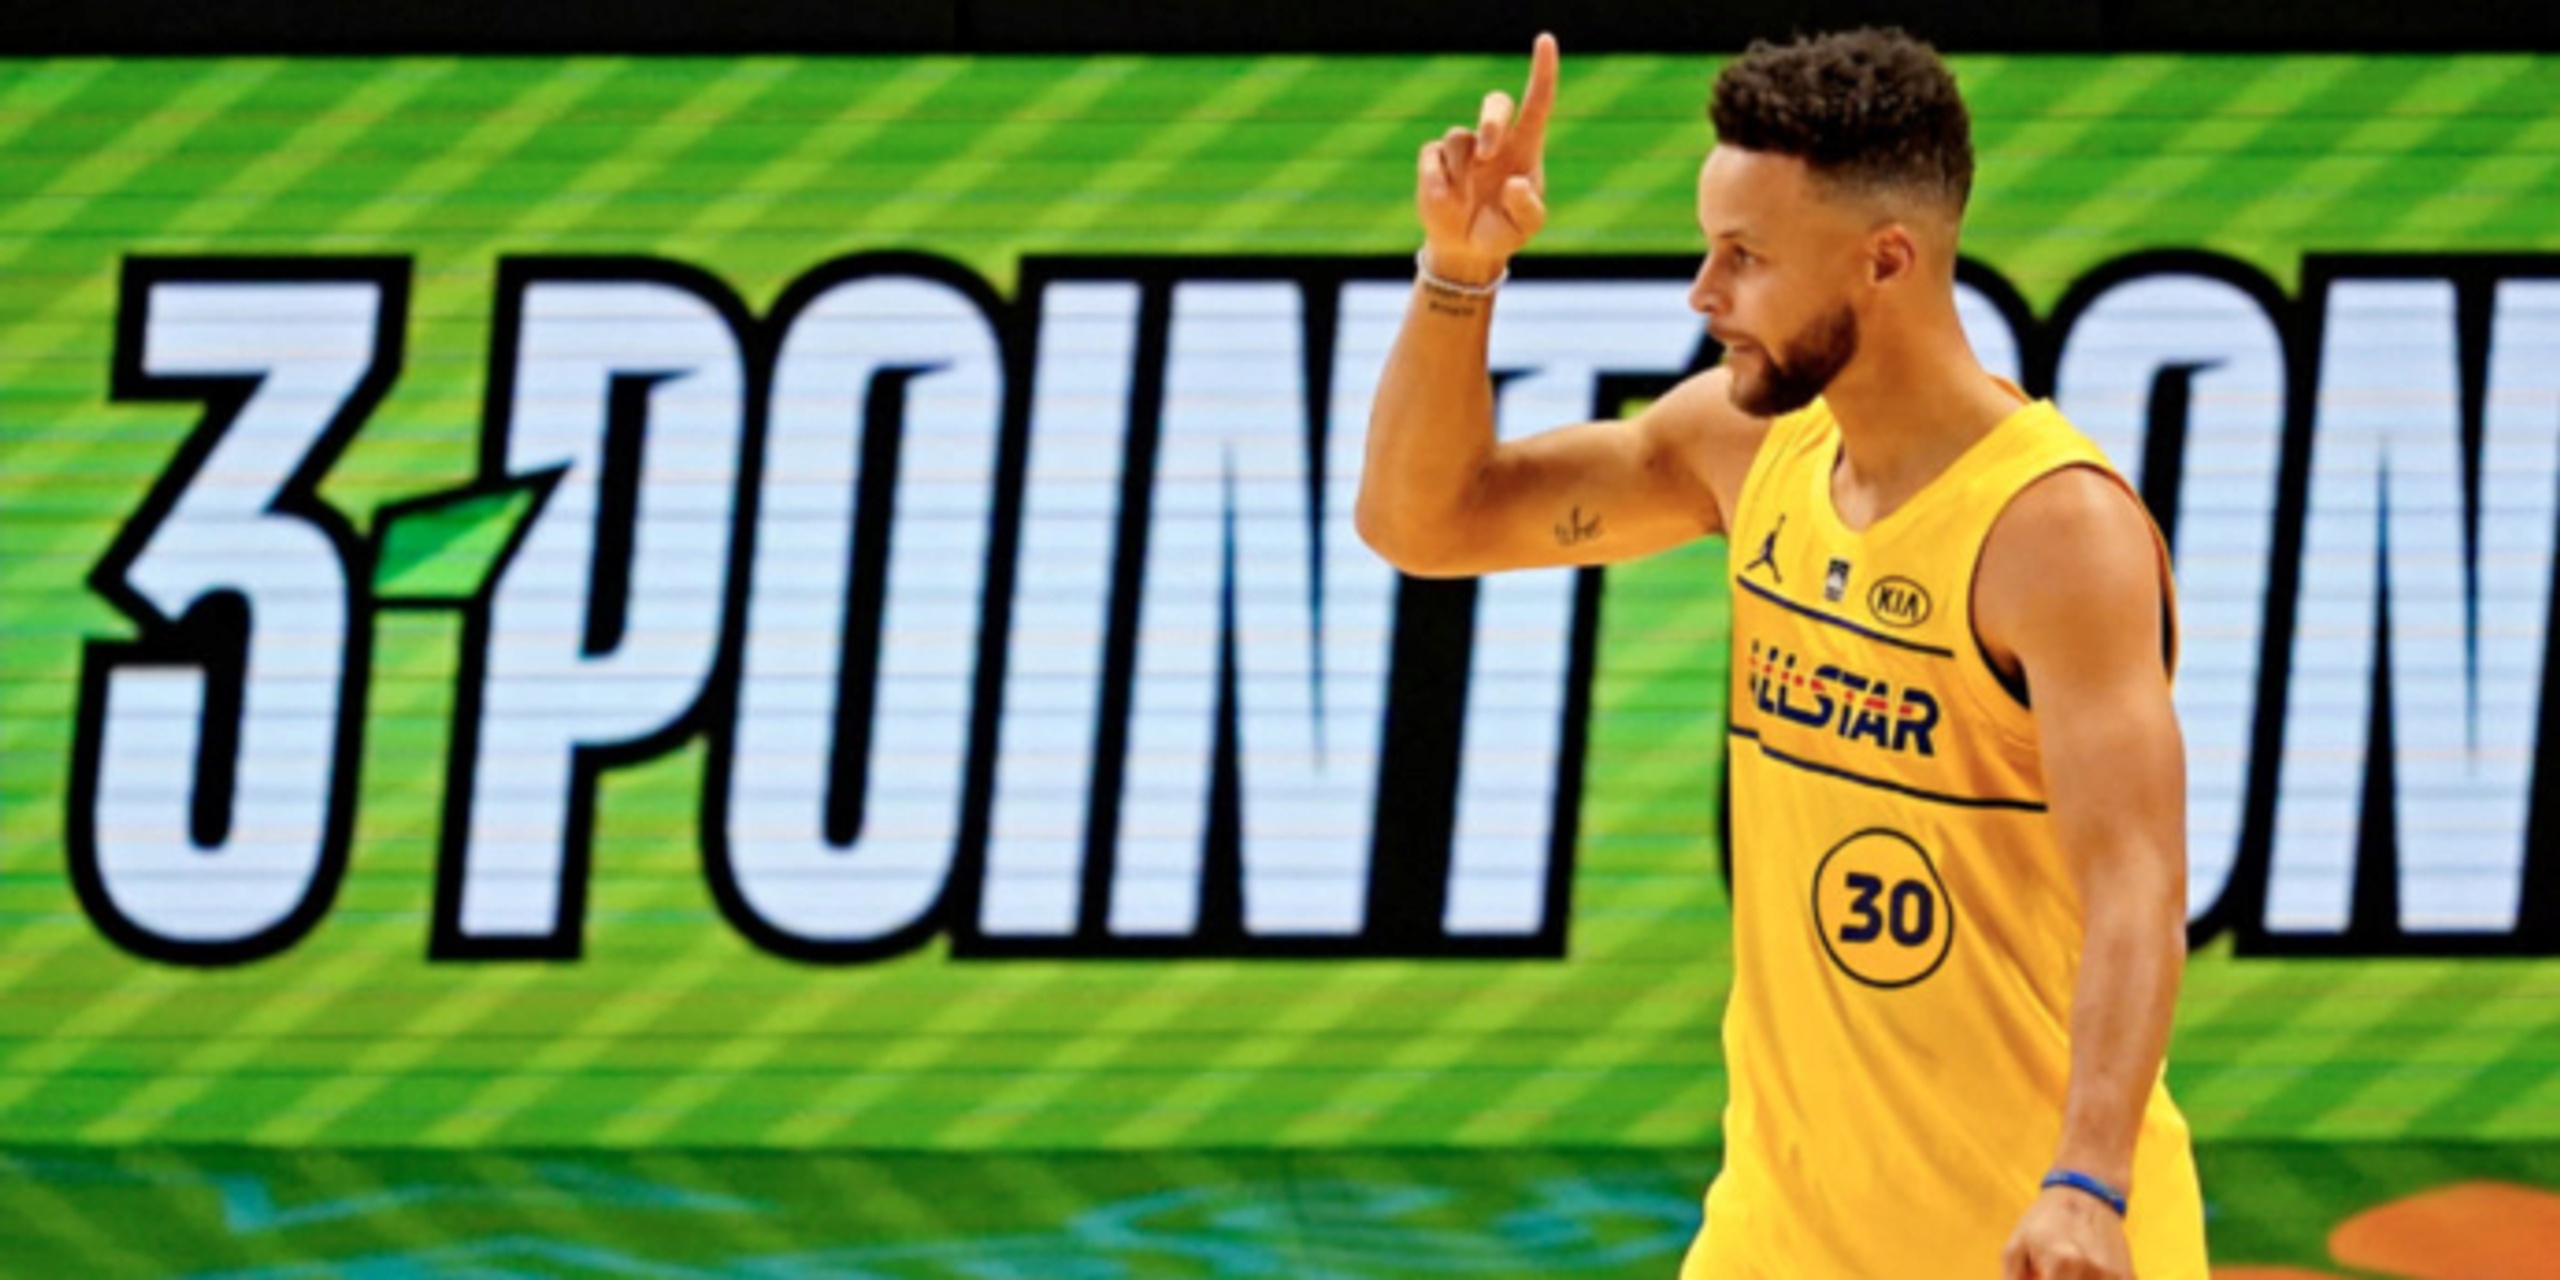 Stephen Curry wins 2021 Mountain Dew 3-Point Contest